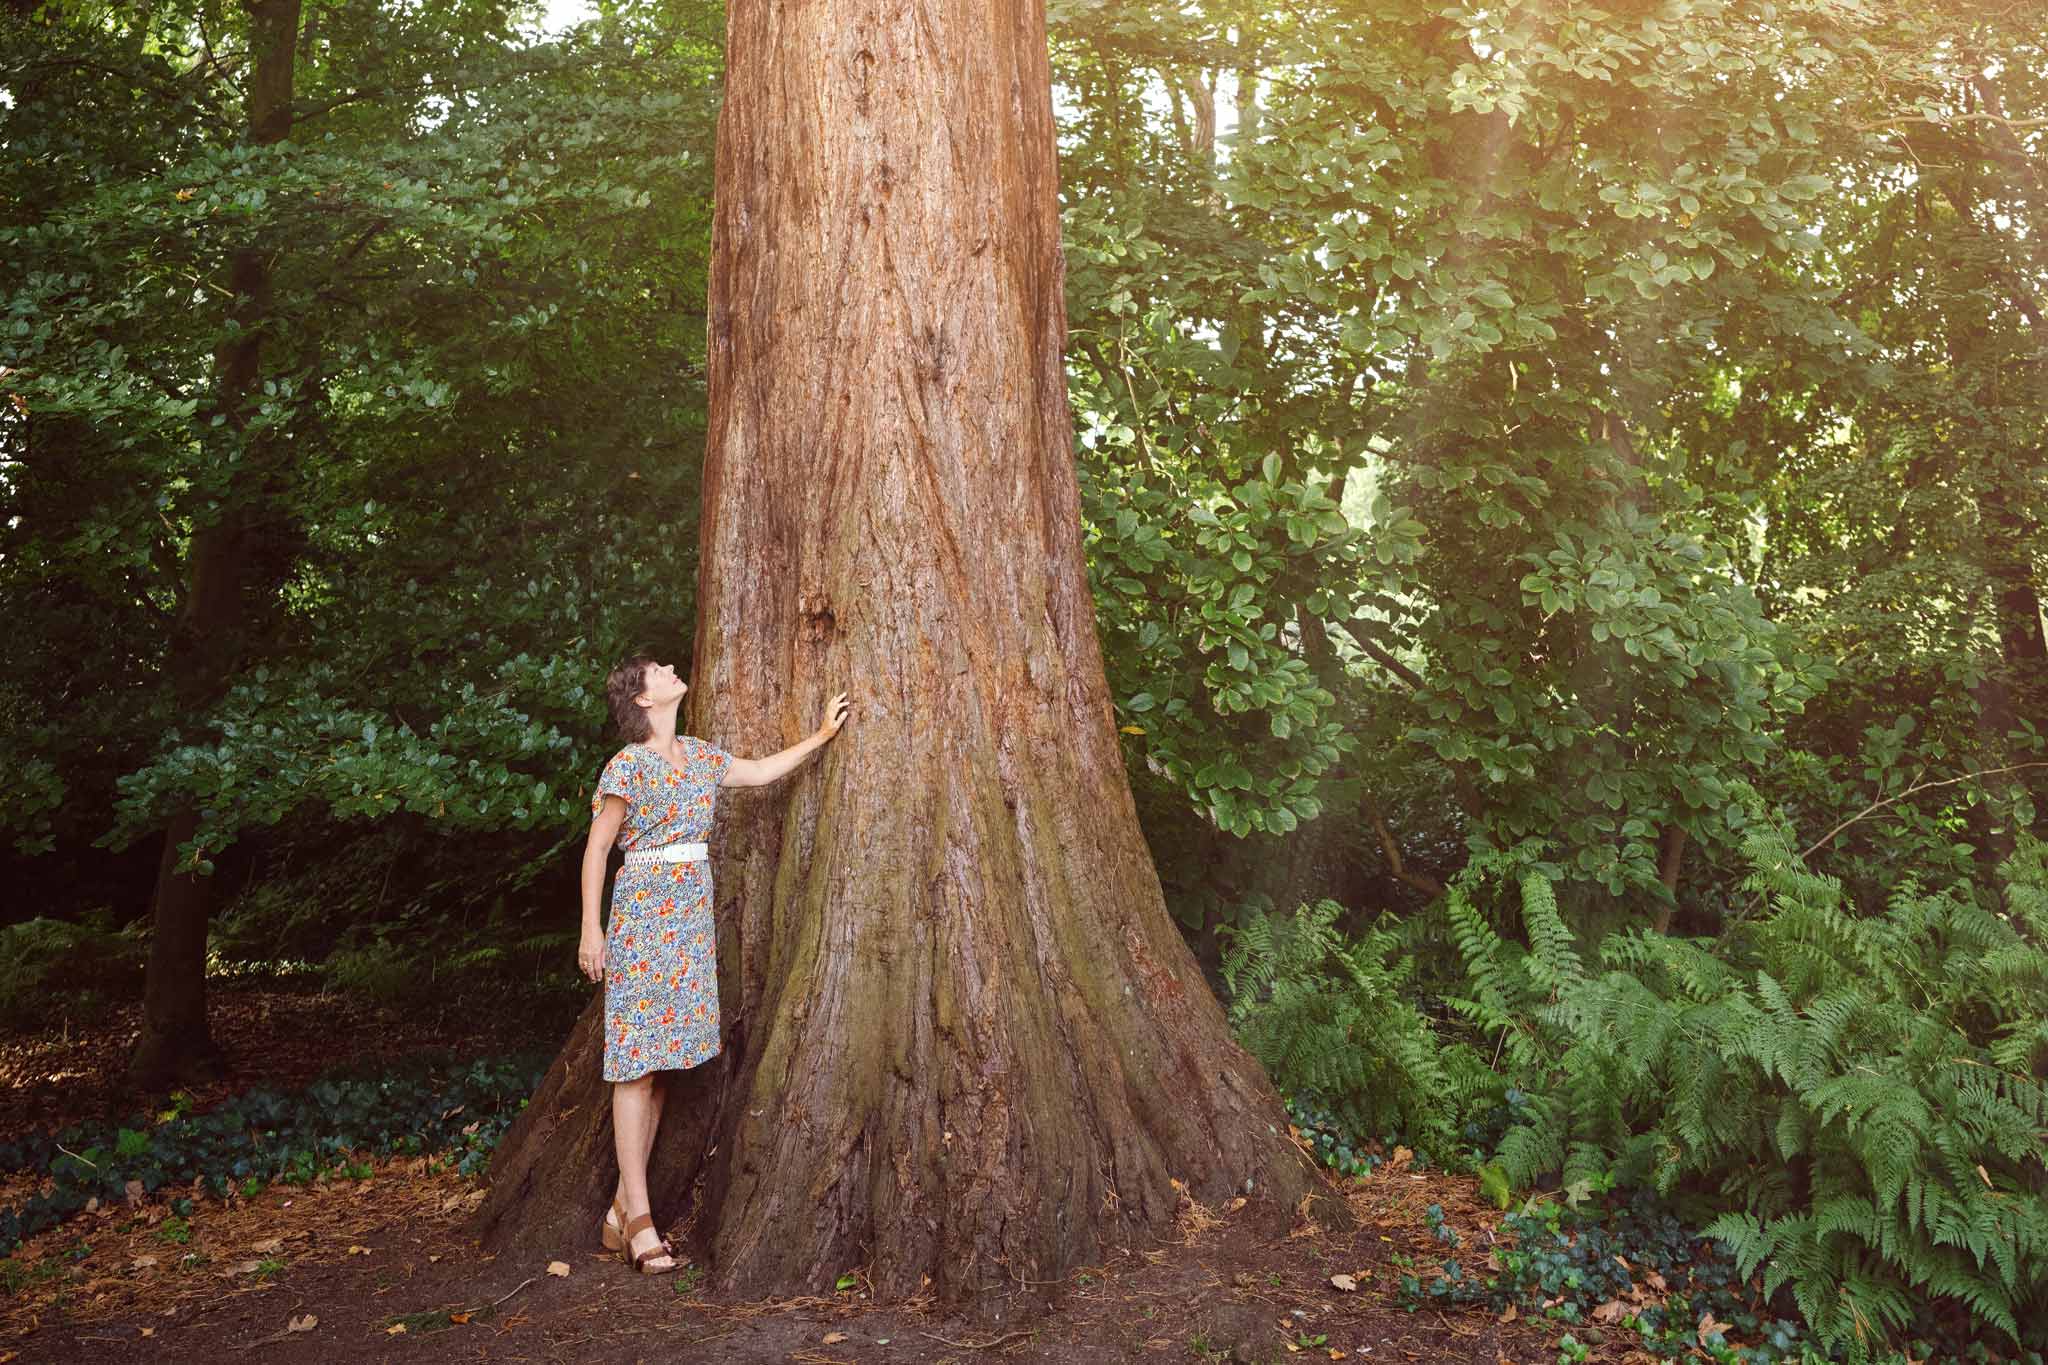 Exterior photo of Carina Weijma standing next to a giant tree in a forest, touching the trunk with her left hand.